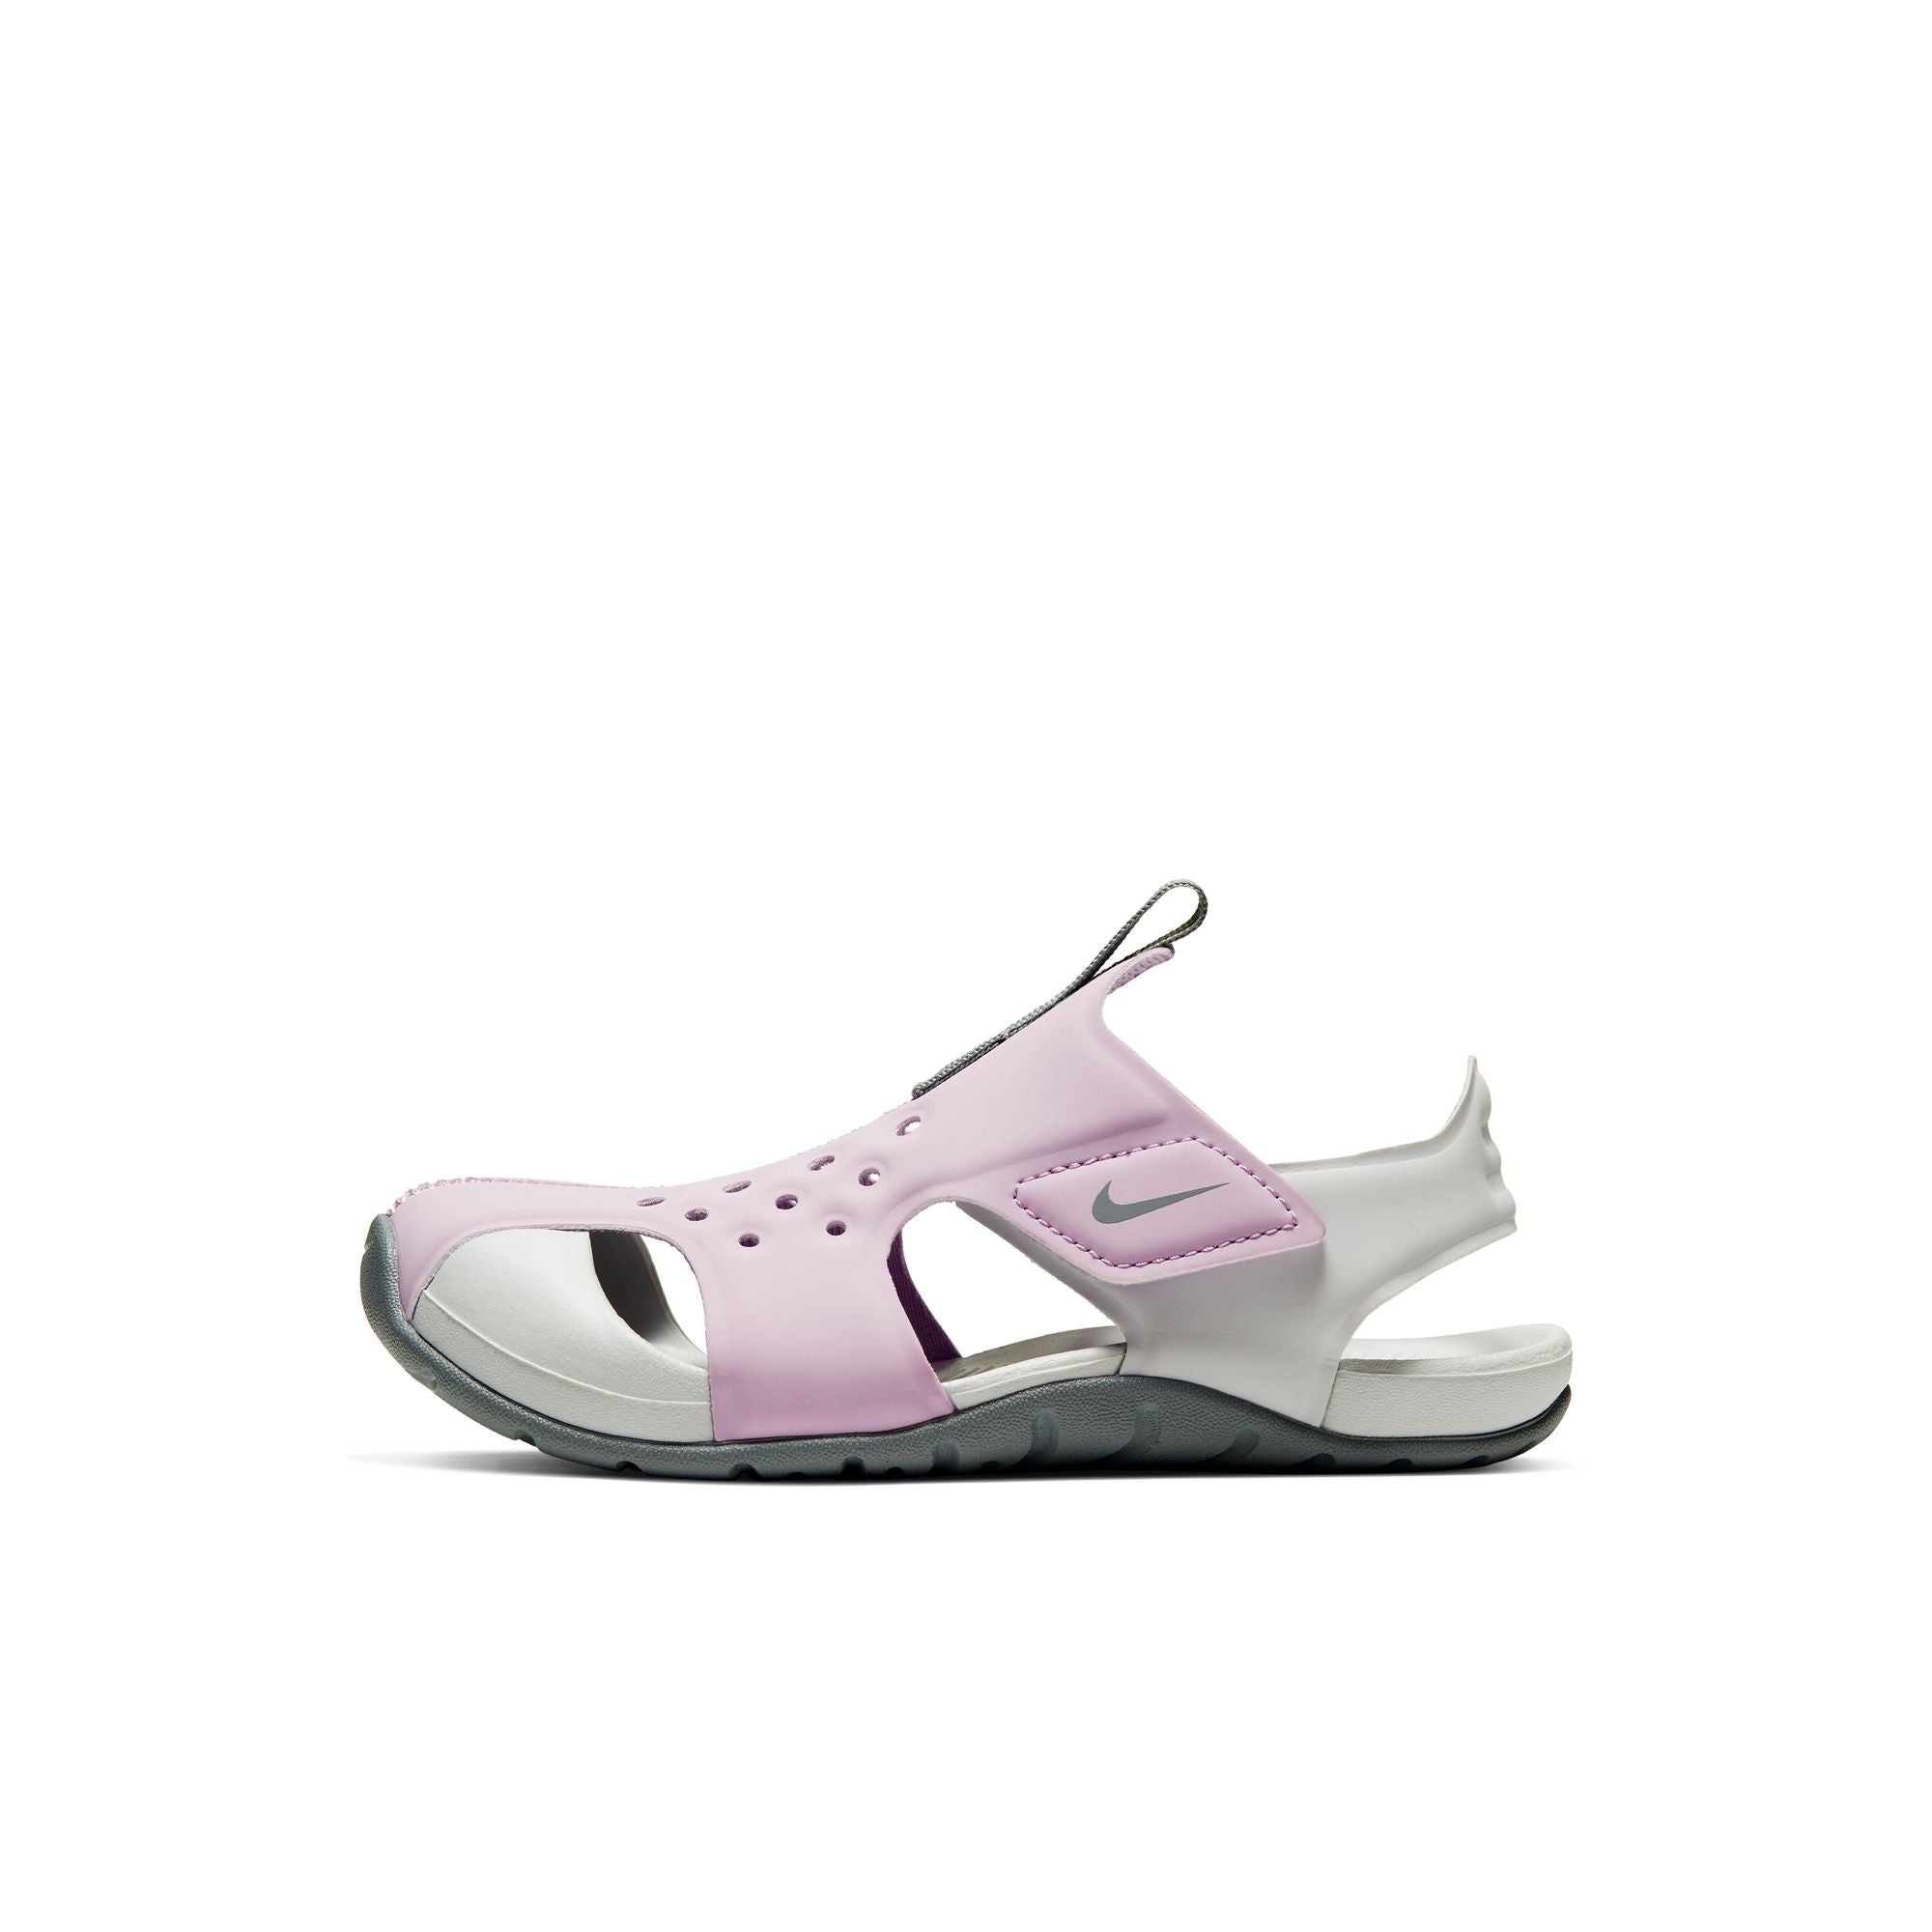 NIKE SUNRAY PROTECT 2 LITTLE KIDS SANDALS